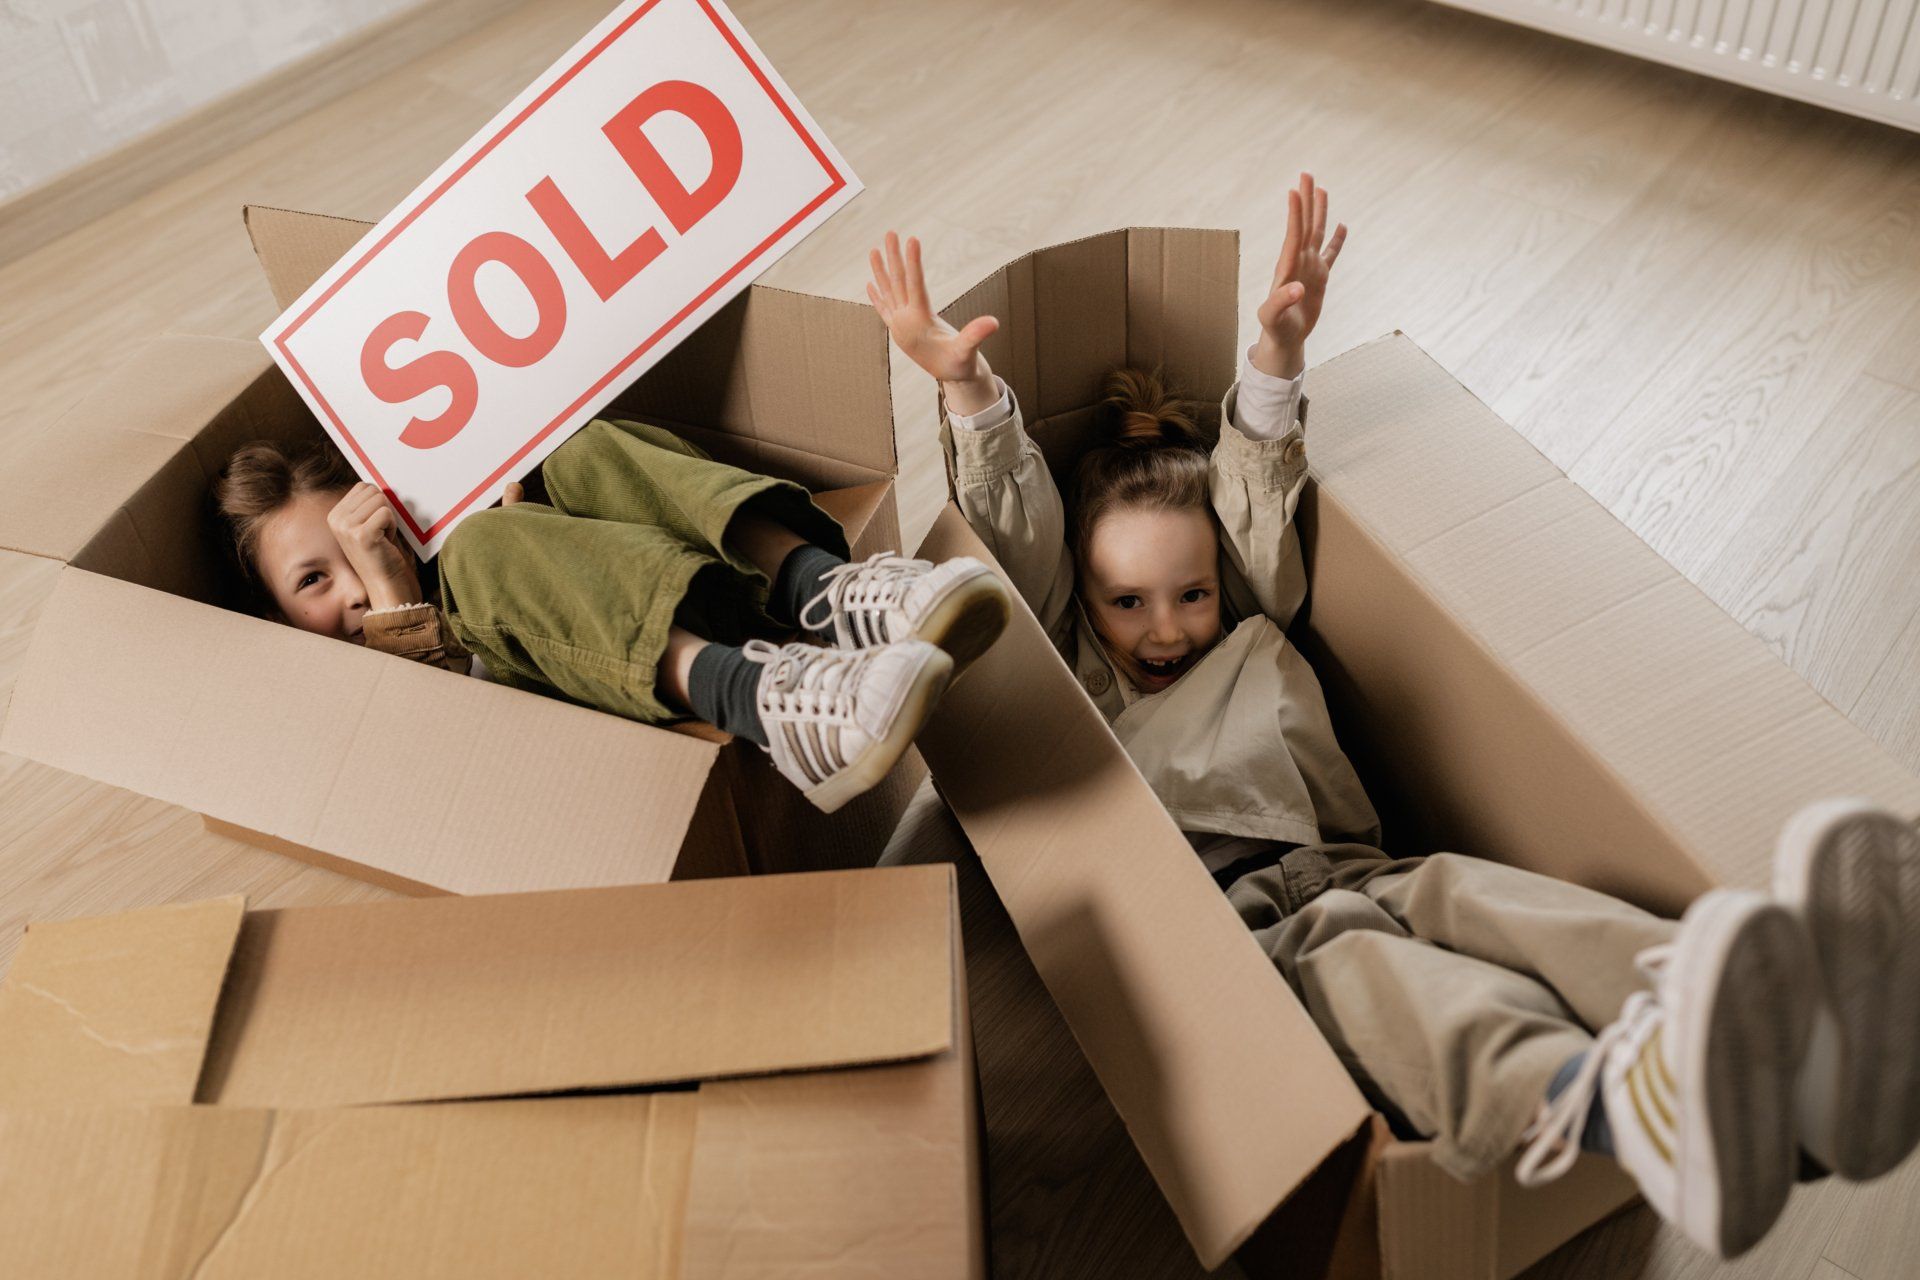 two children are sitting in a cardboard box holding a sold sign .